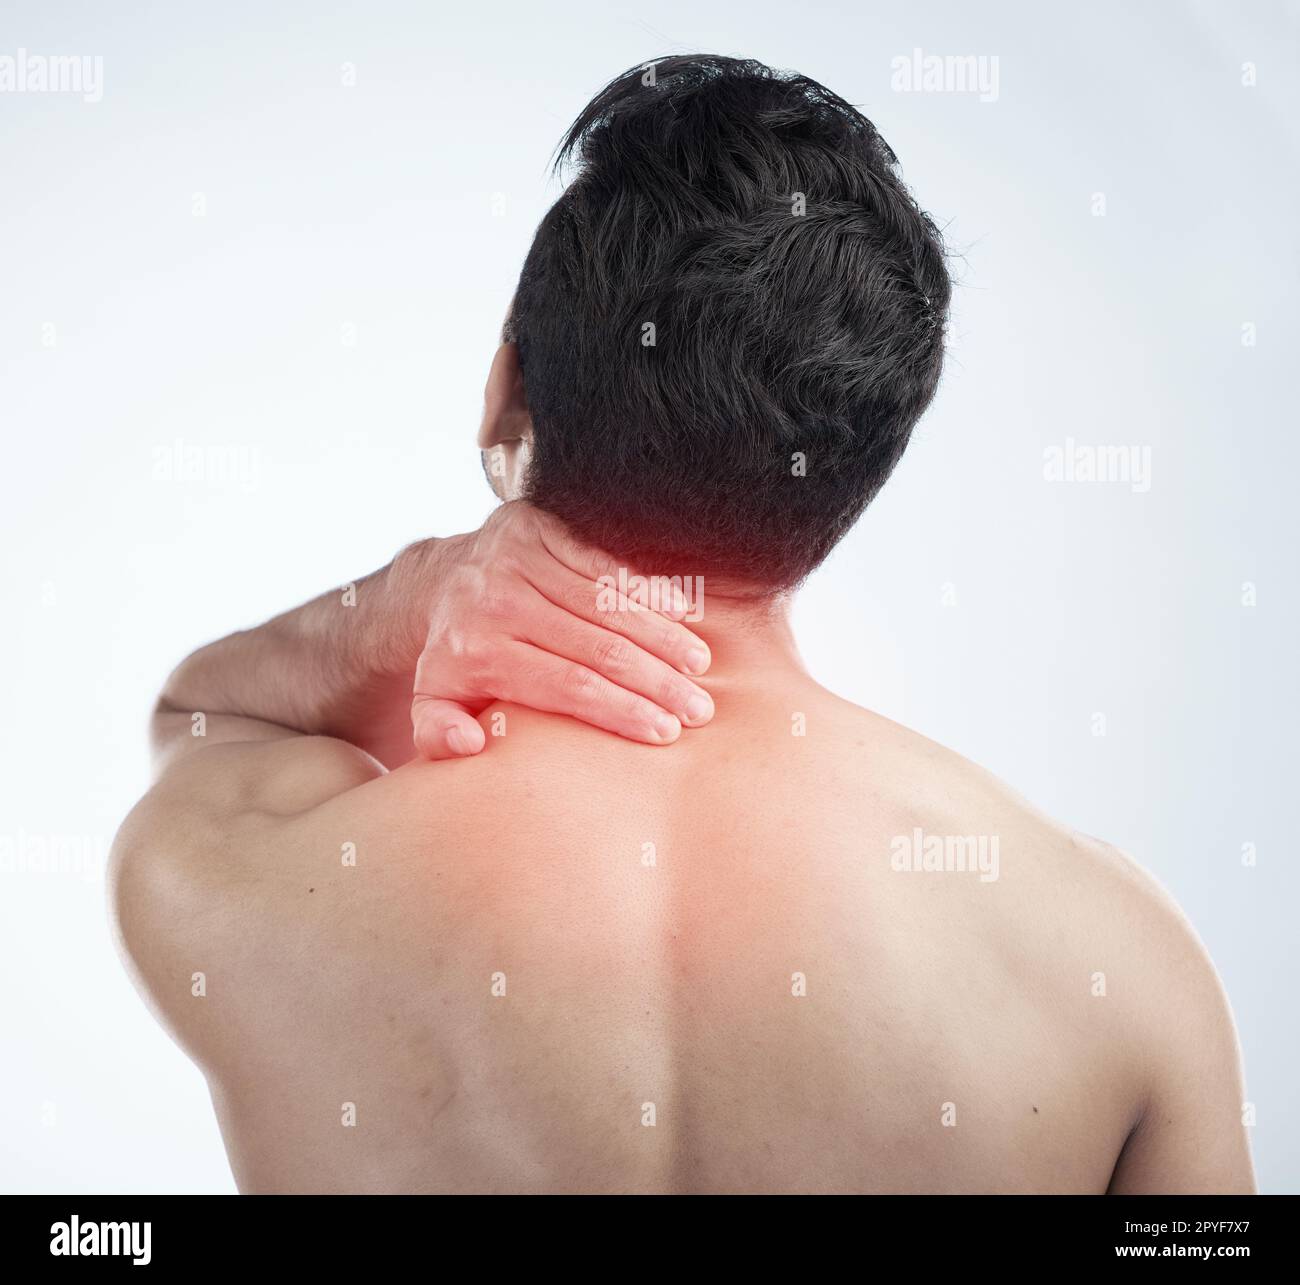 https://c8.alamy.com/comp/2PYF7X7/man-hands-or-body-neck-pain-and-glow-on-studio-background-in-exercise-workout-or-training-stress-tension-or-3d-muscle-crisis-injury-sports-athlete-or-fitness-person-in-first-aid-burnout-2PYF7X7.jpg